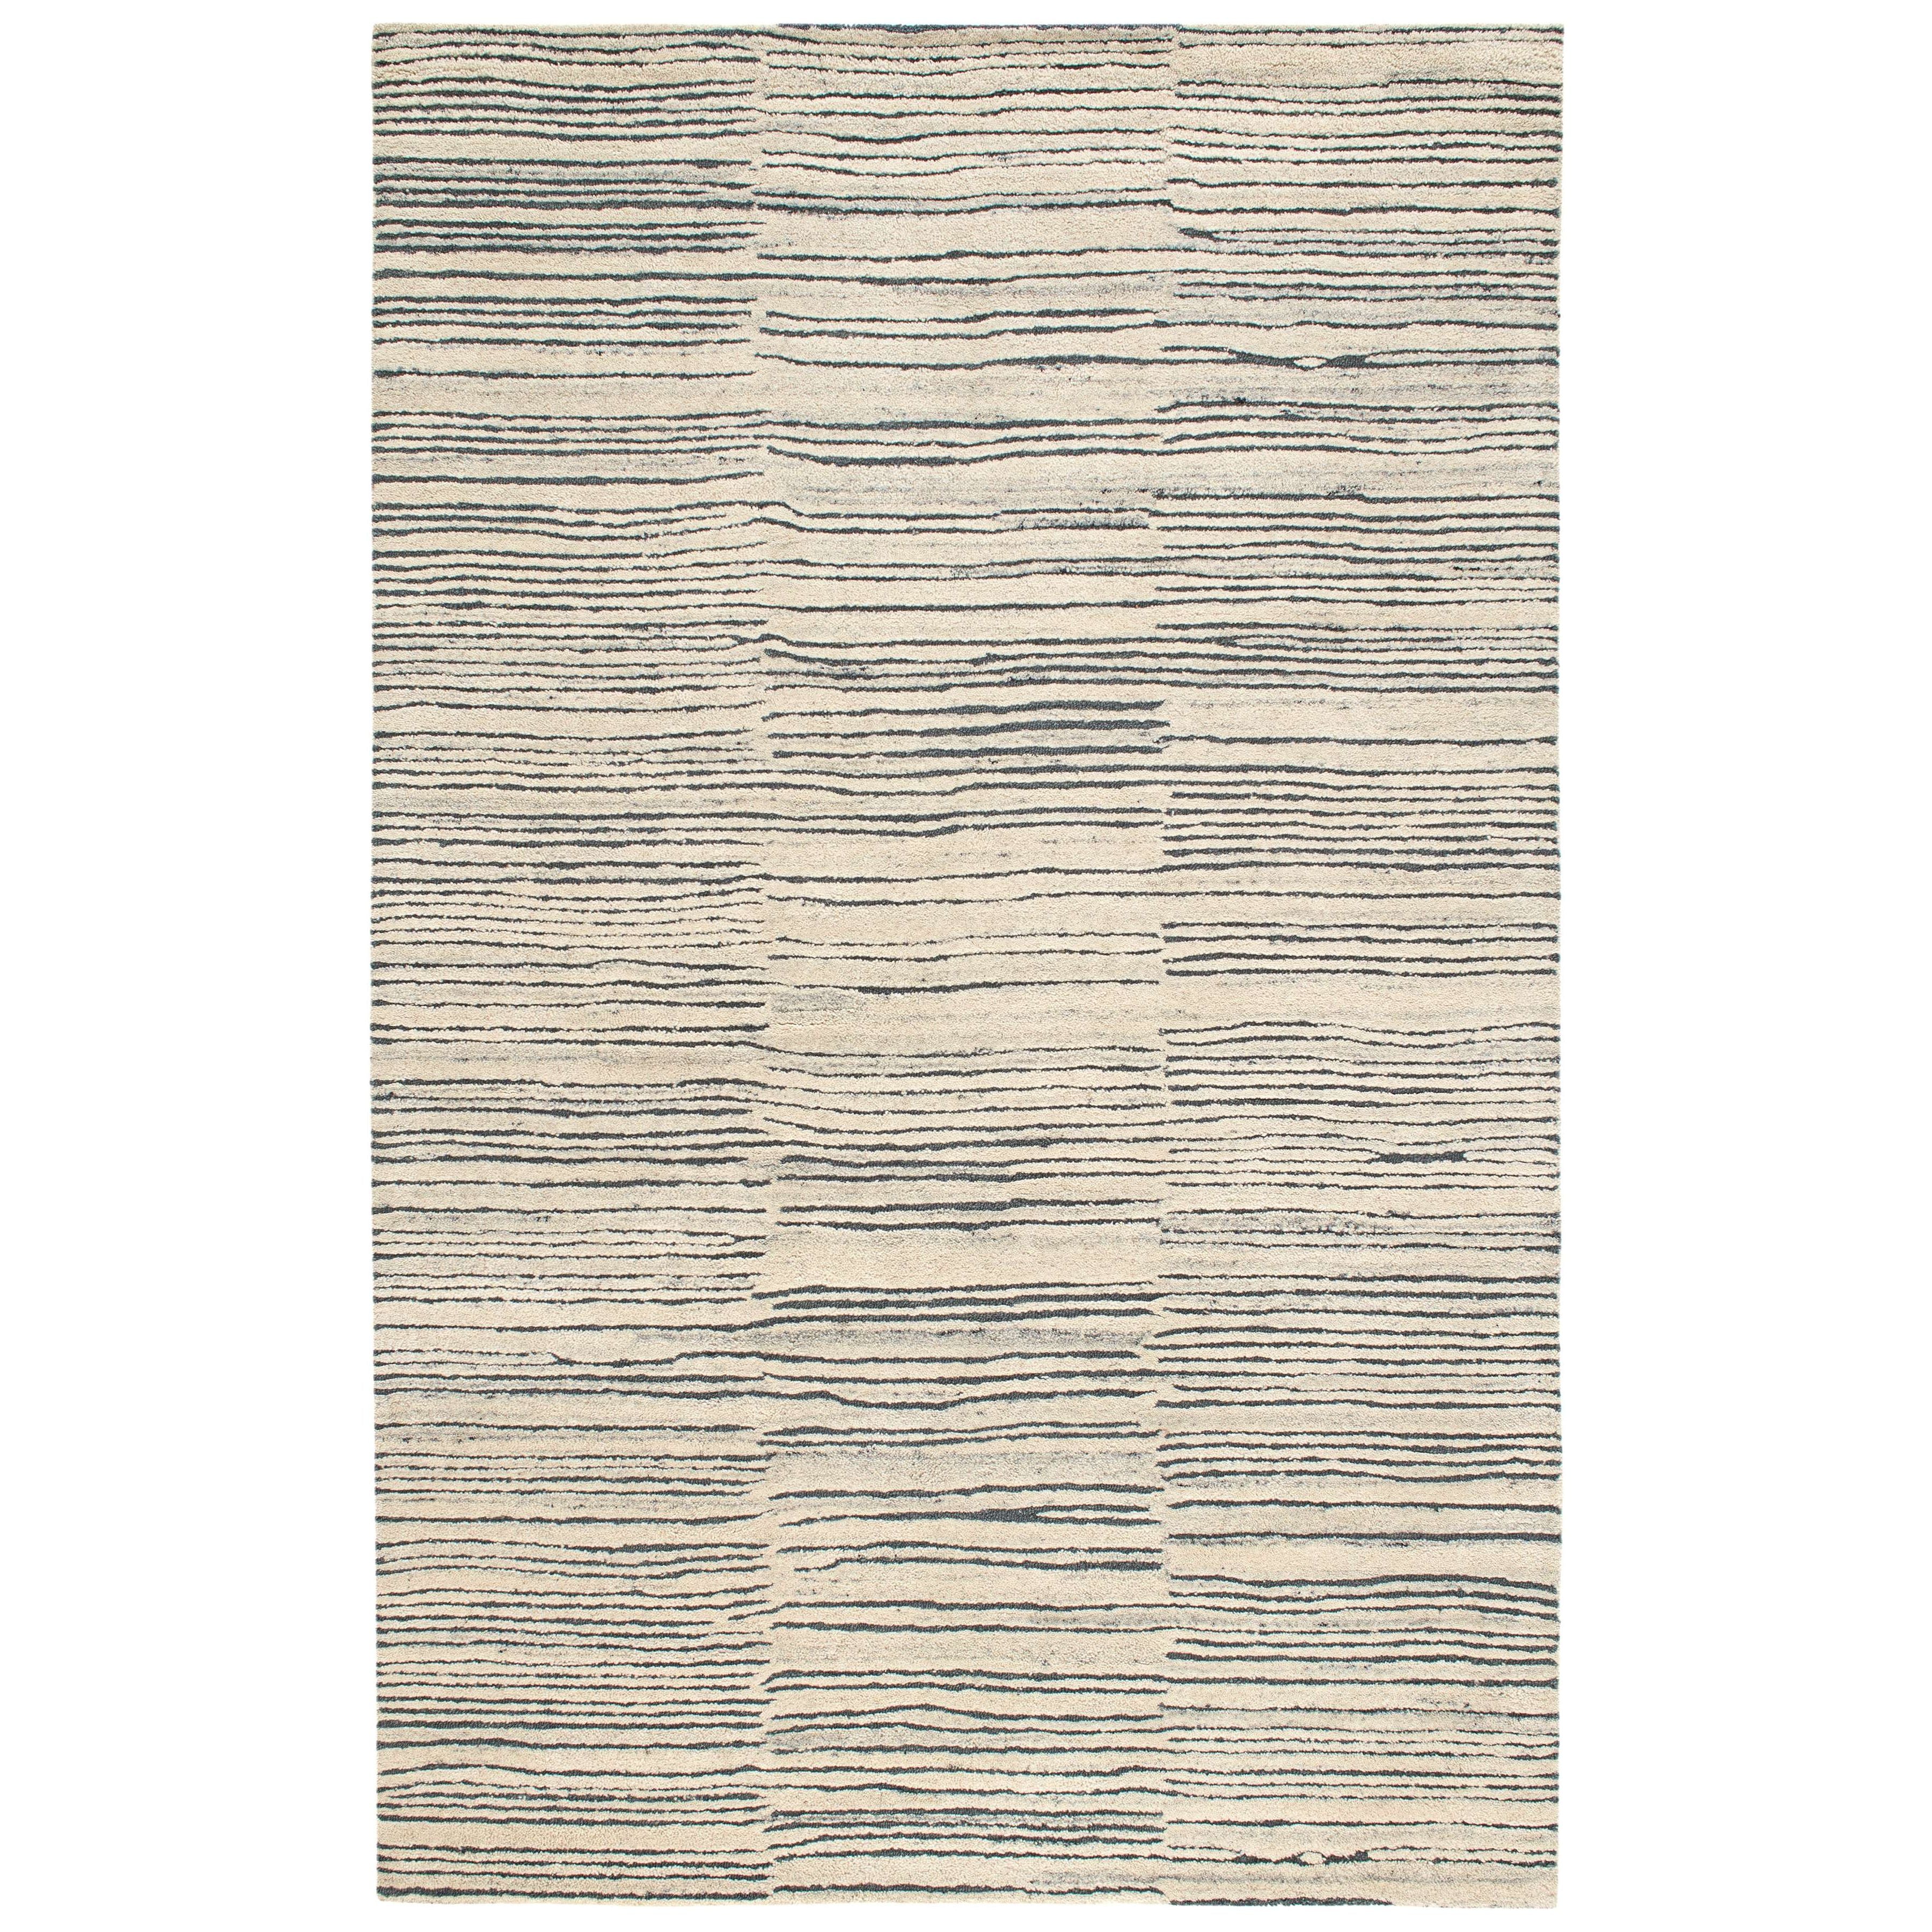 Inspired by substrate layers of sandstone sediments that chronicle the millennia, this luxurious, irregularly striped wool rug will stand the test of time. The subtle degradations of a natural undyed fleece pile enhance the finely observed irregular striping in a softly mineral palette. The subtle beauty of the higher sheared tufts emphasizes the contrast of the densely looped stripes. Amethyst Home provides interior design, new construction, custom furniture, and area rugs in the Kansas City metro area.